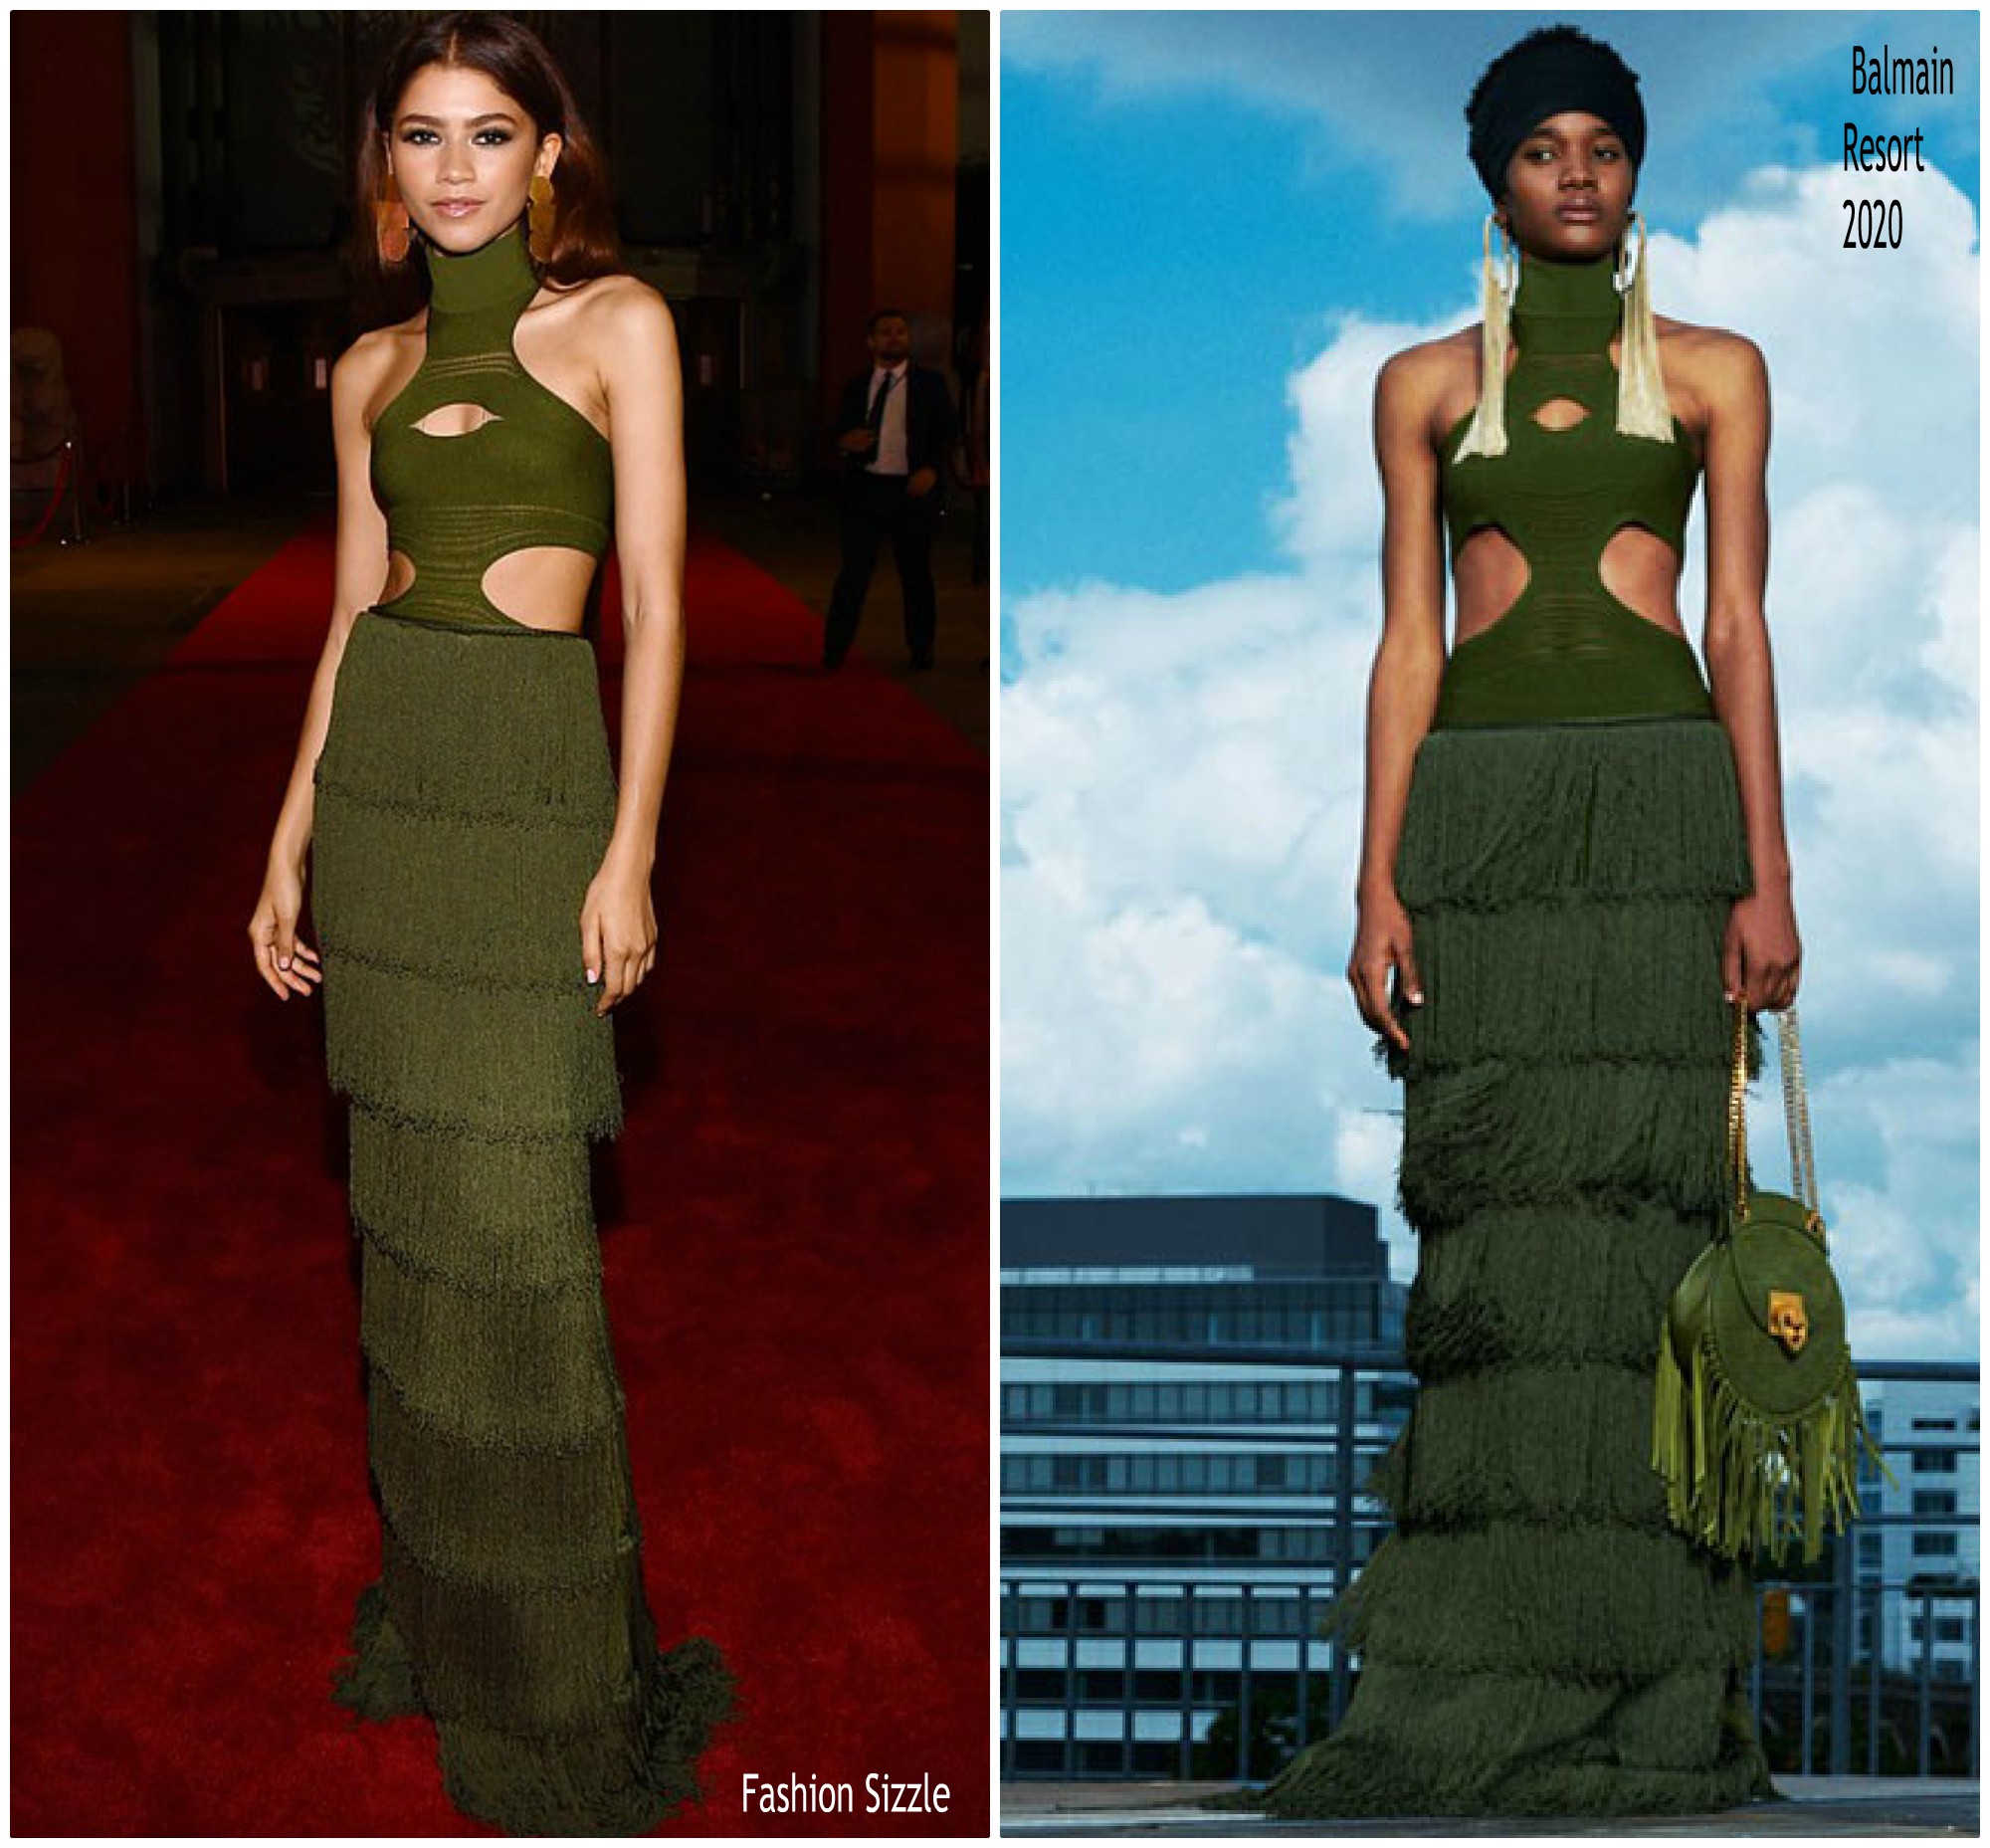 zendaya-coleman-in-balmain-spider-man-far-from-home-premiere-afterparty